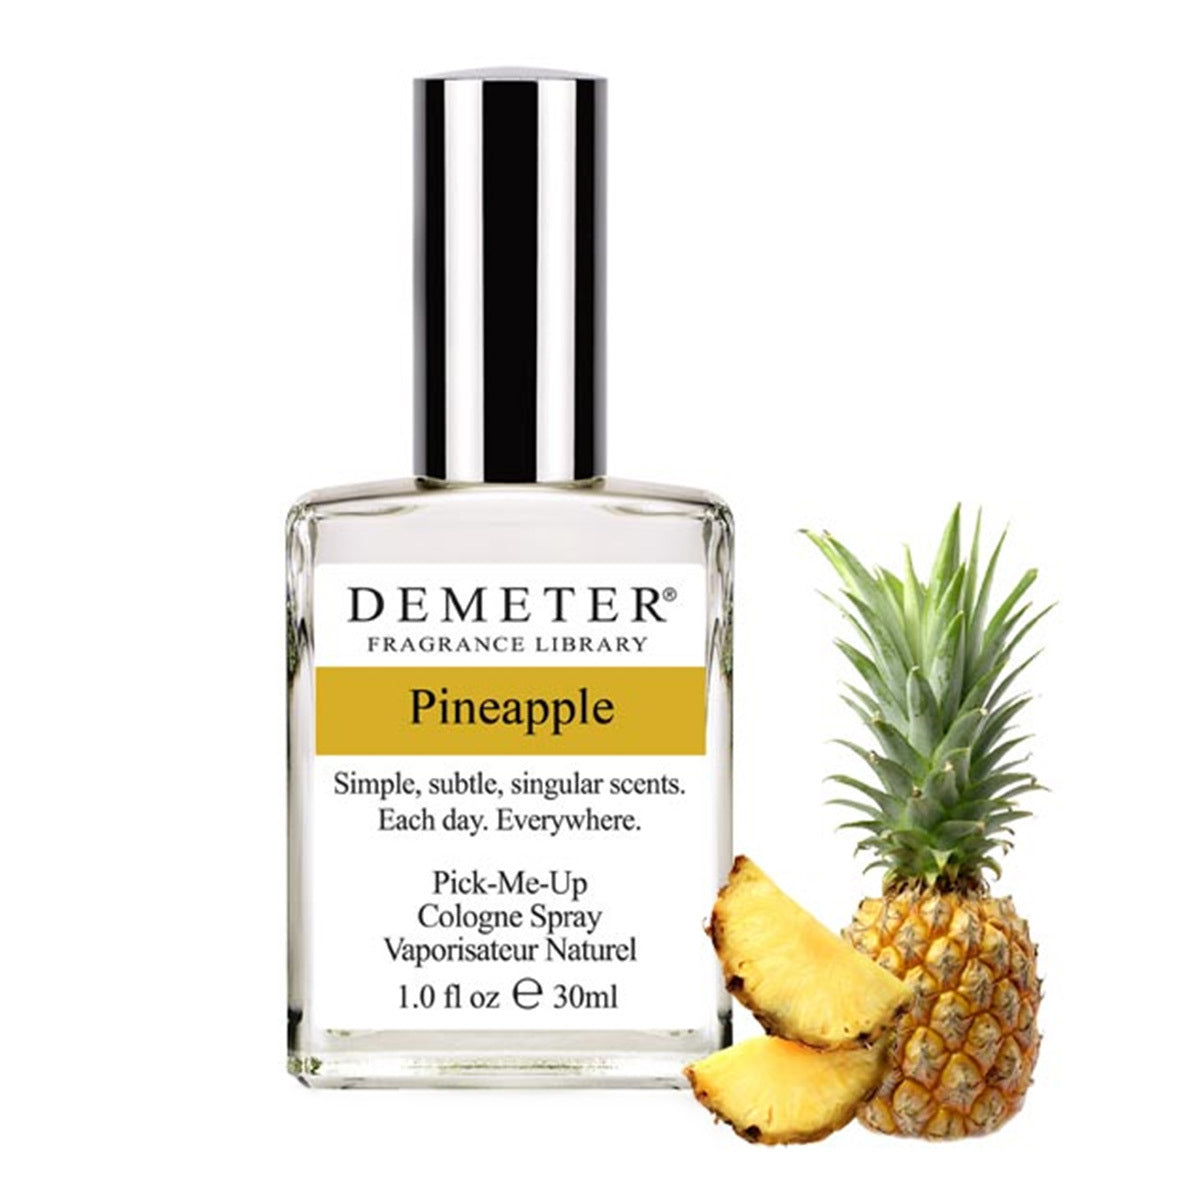 Primary image of Pineapple Cologne Spray